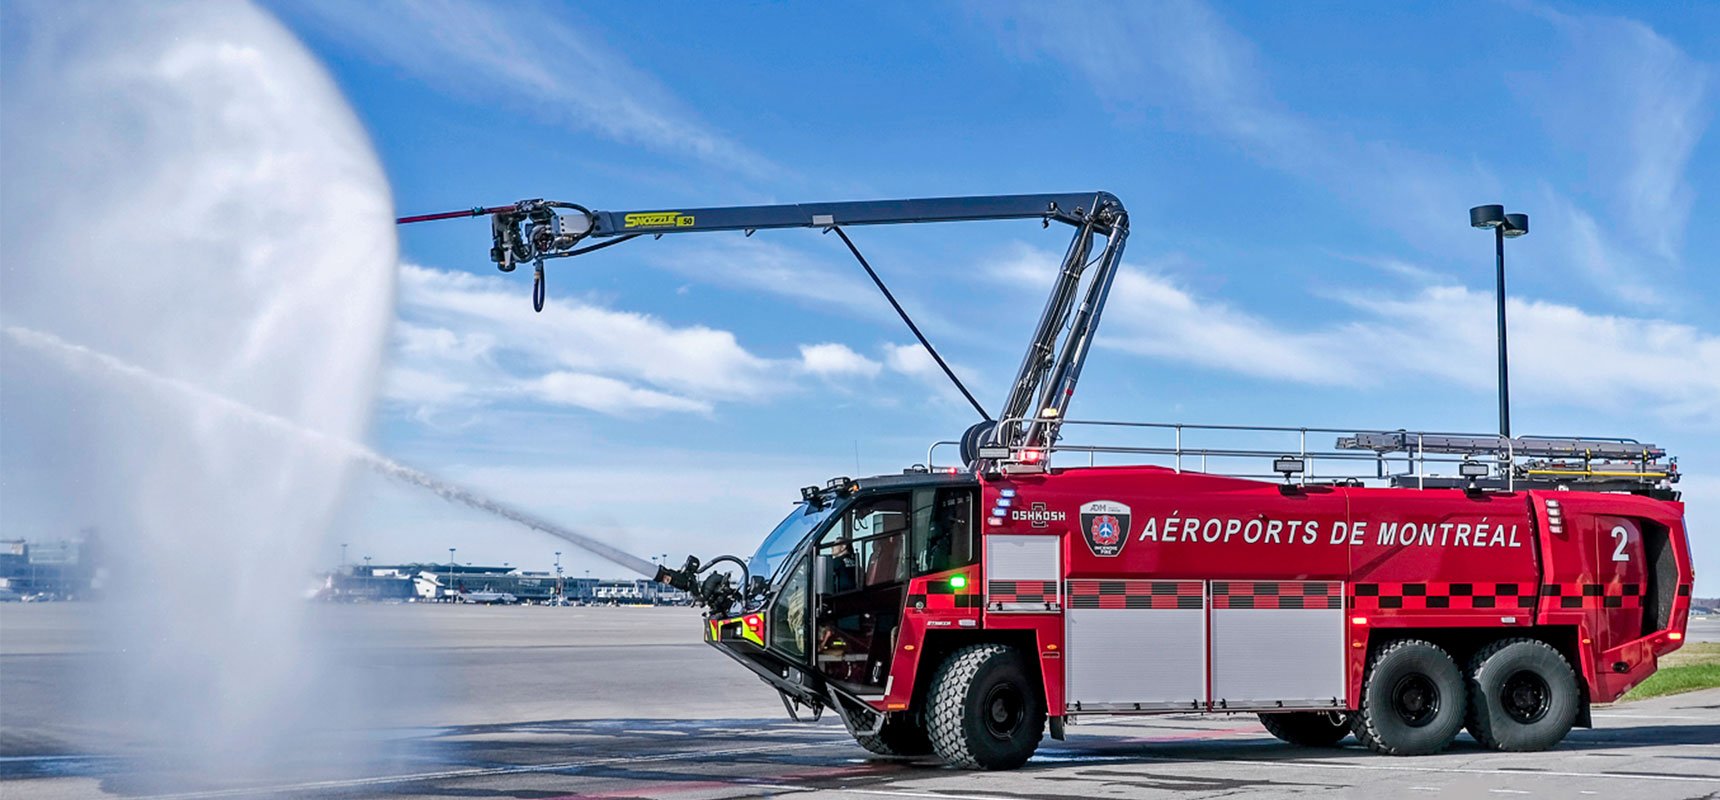 ADM Aeroports de Montreal has taken deliver of five Oshkosh Airport Products STriker 6x6 ARFF vehicles.